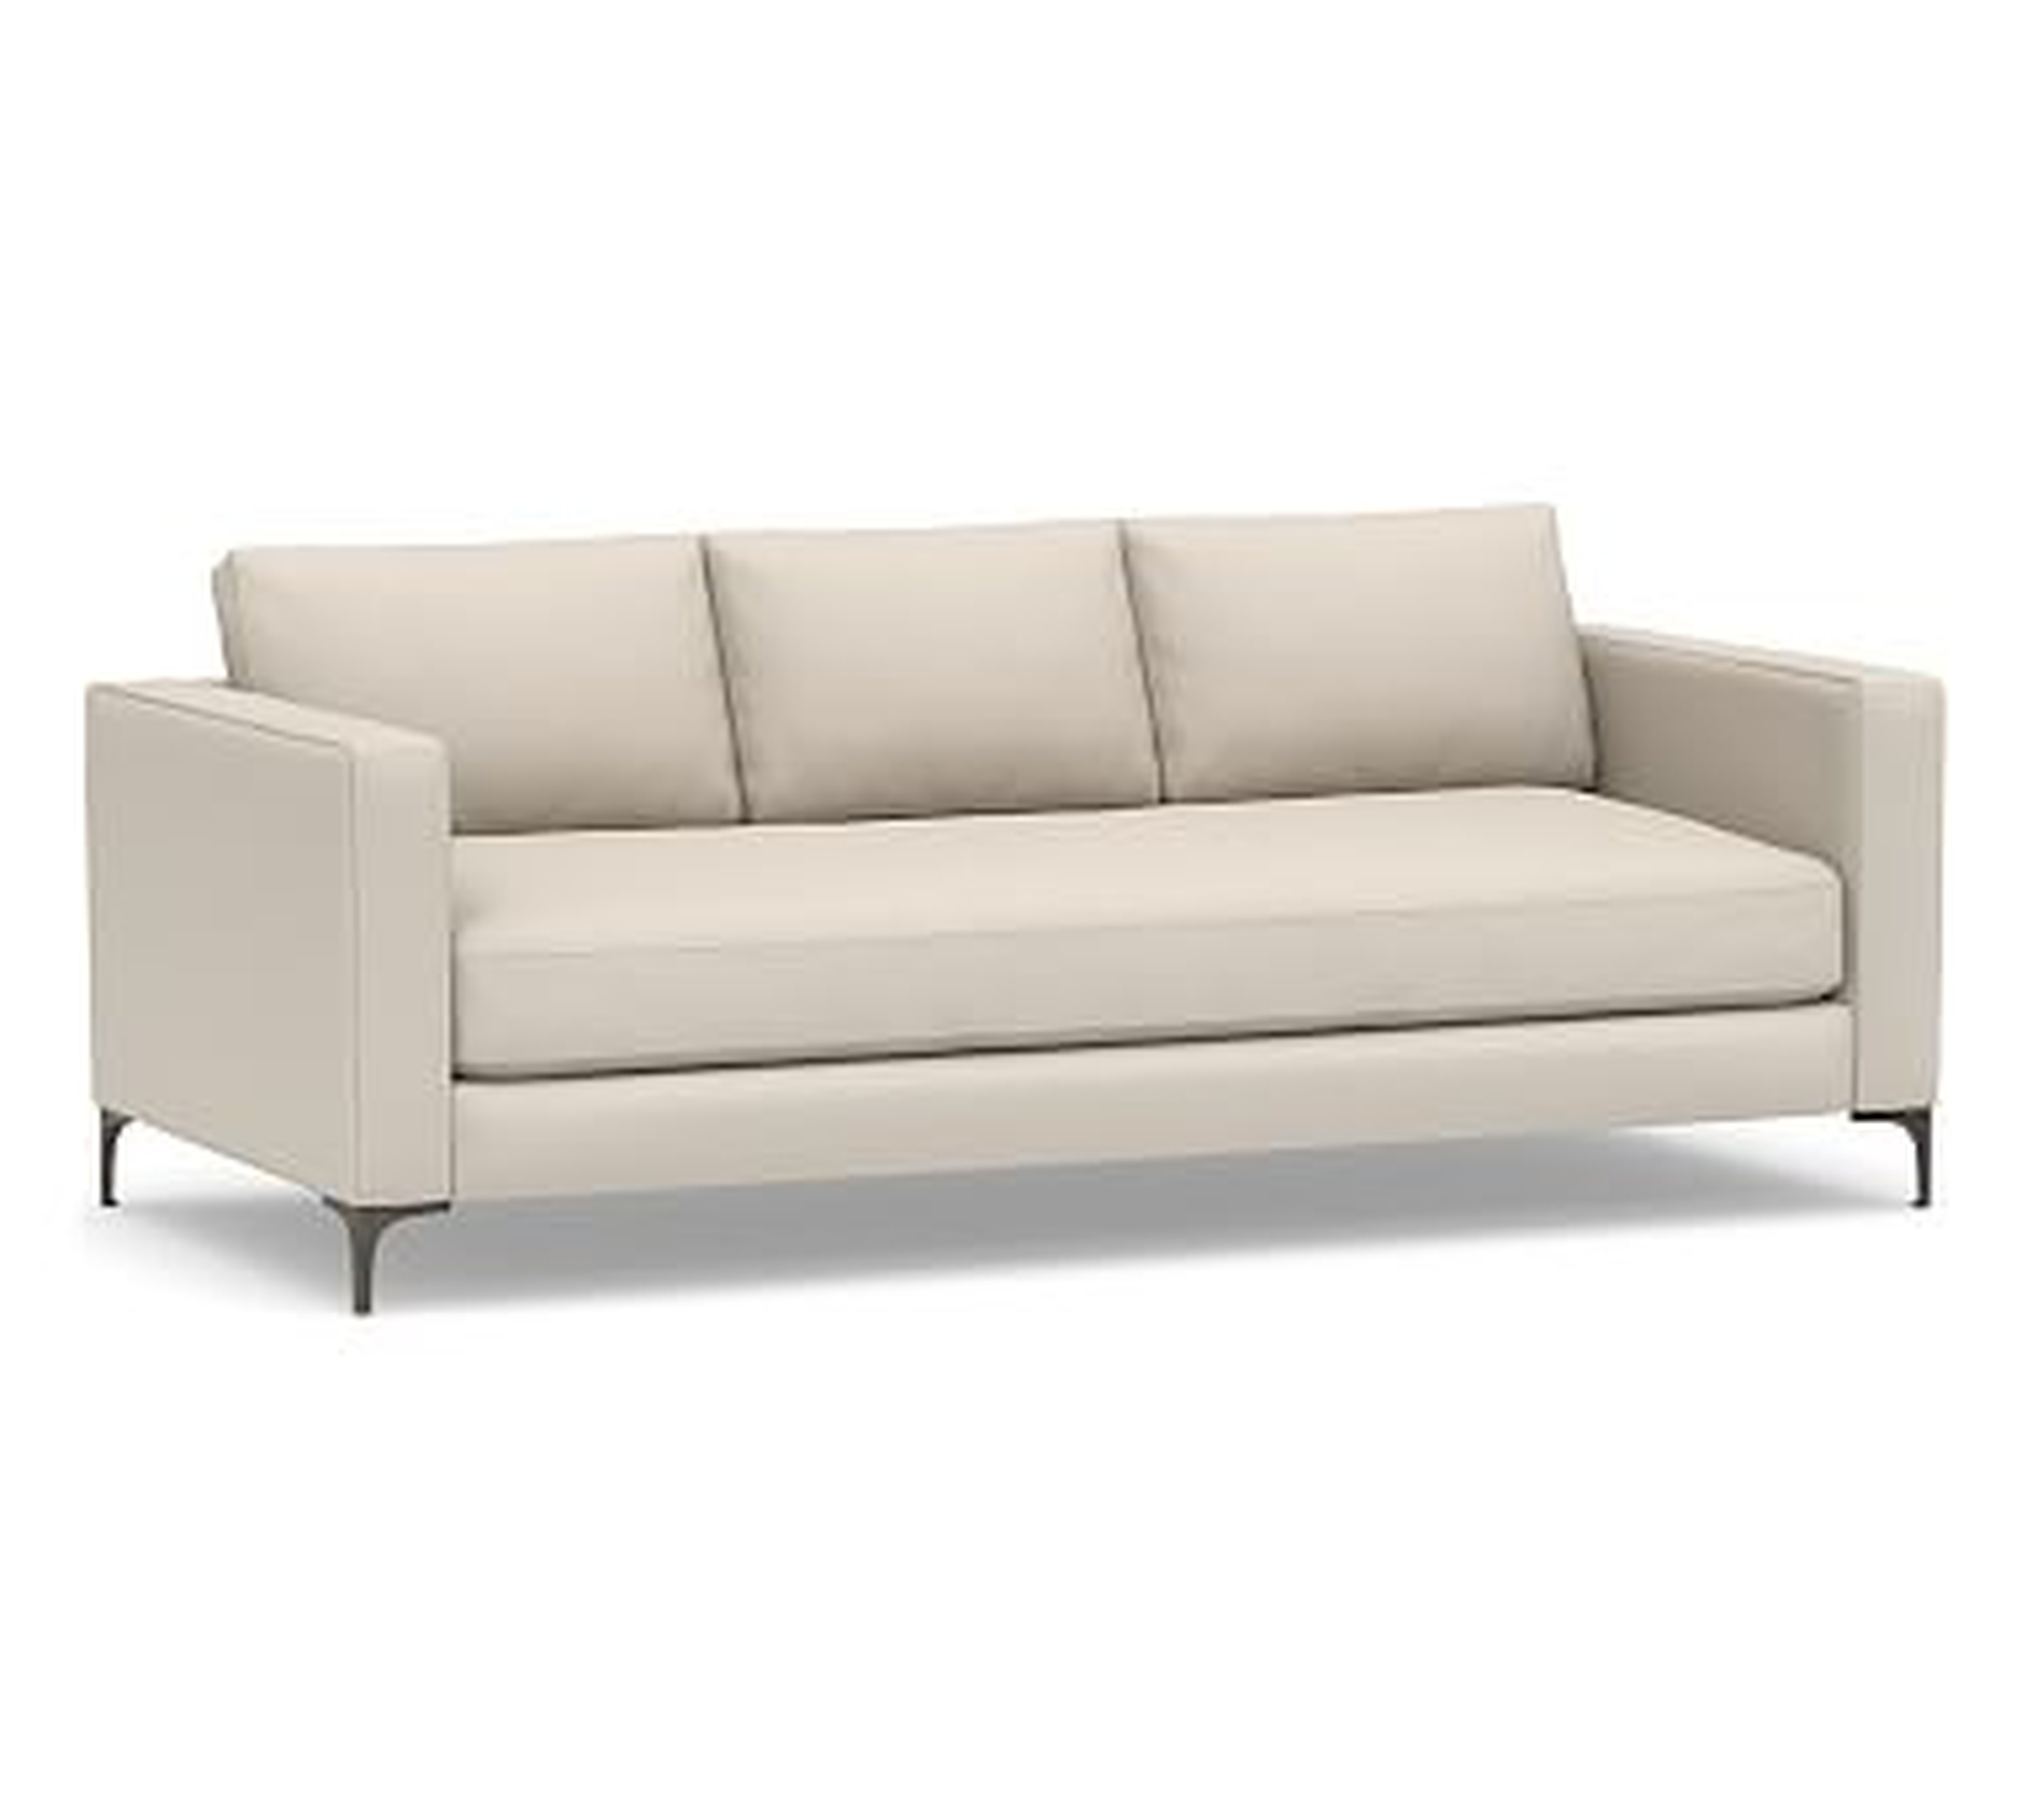 Jake Upholstered Sofa 85" with Bronze Legs, Polyester Wrapped Cushions, Performance Brushed Basketweave Oatmeal - Pottery Barn